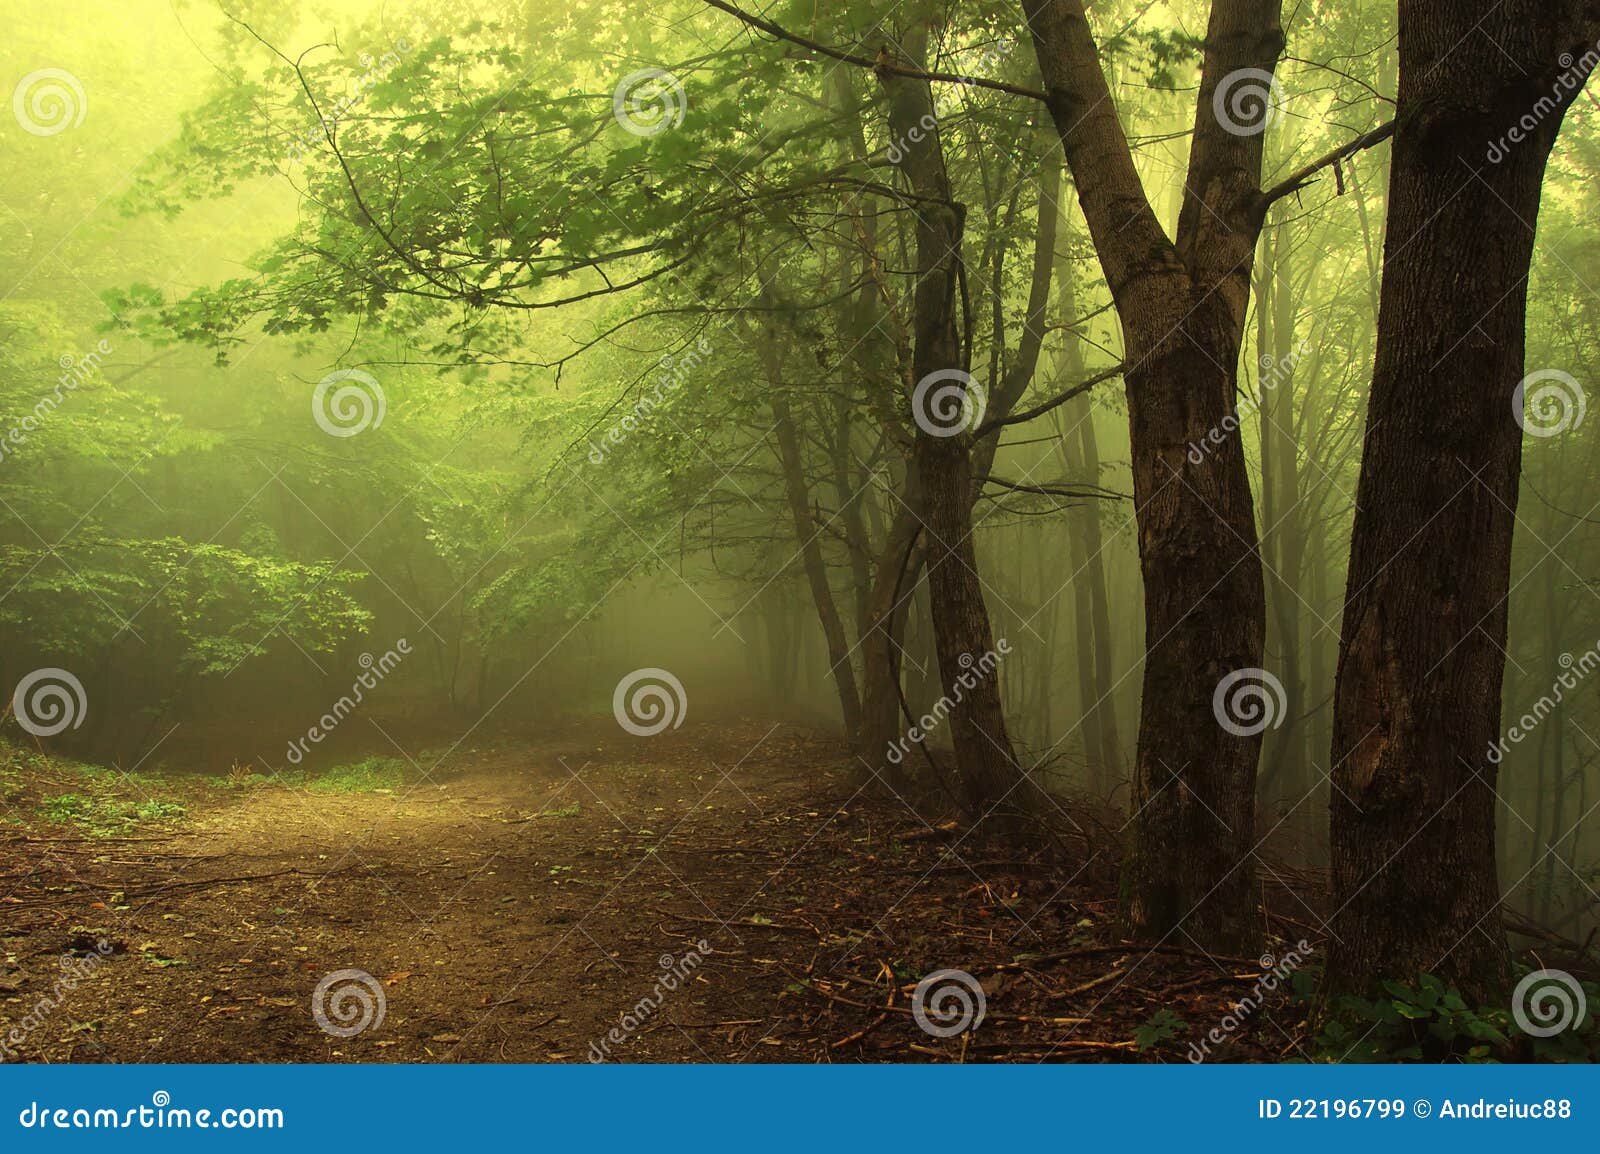 green forest with fog